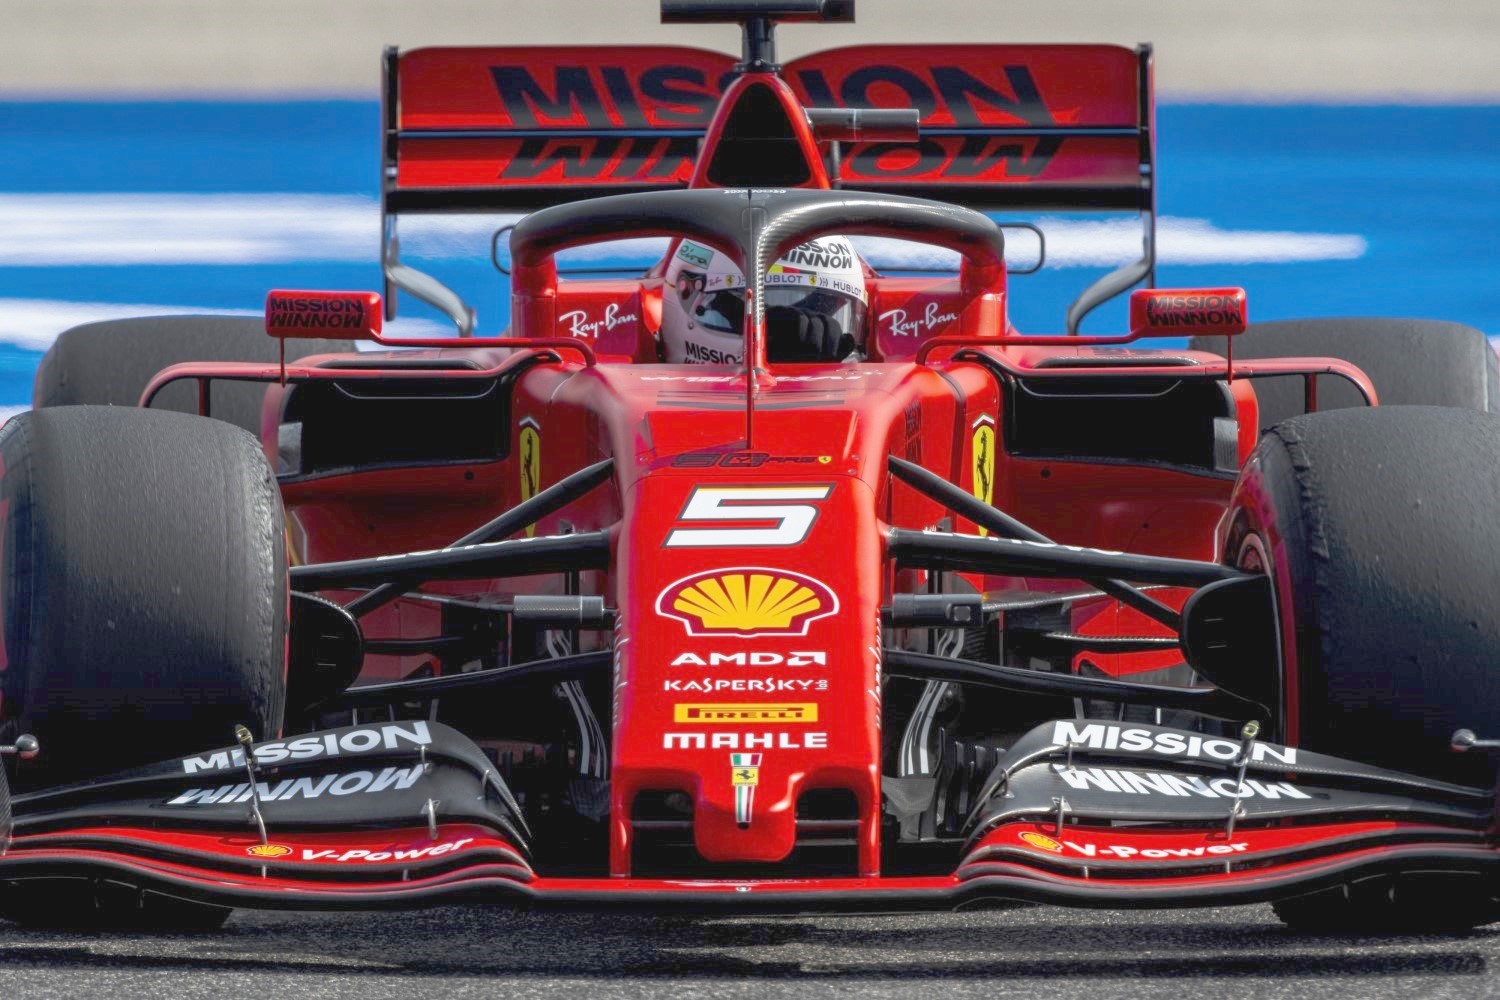 Was Ferrari cheating or was its inferior chassis really bad over COTA's washboard surface